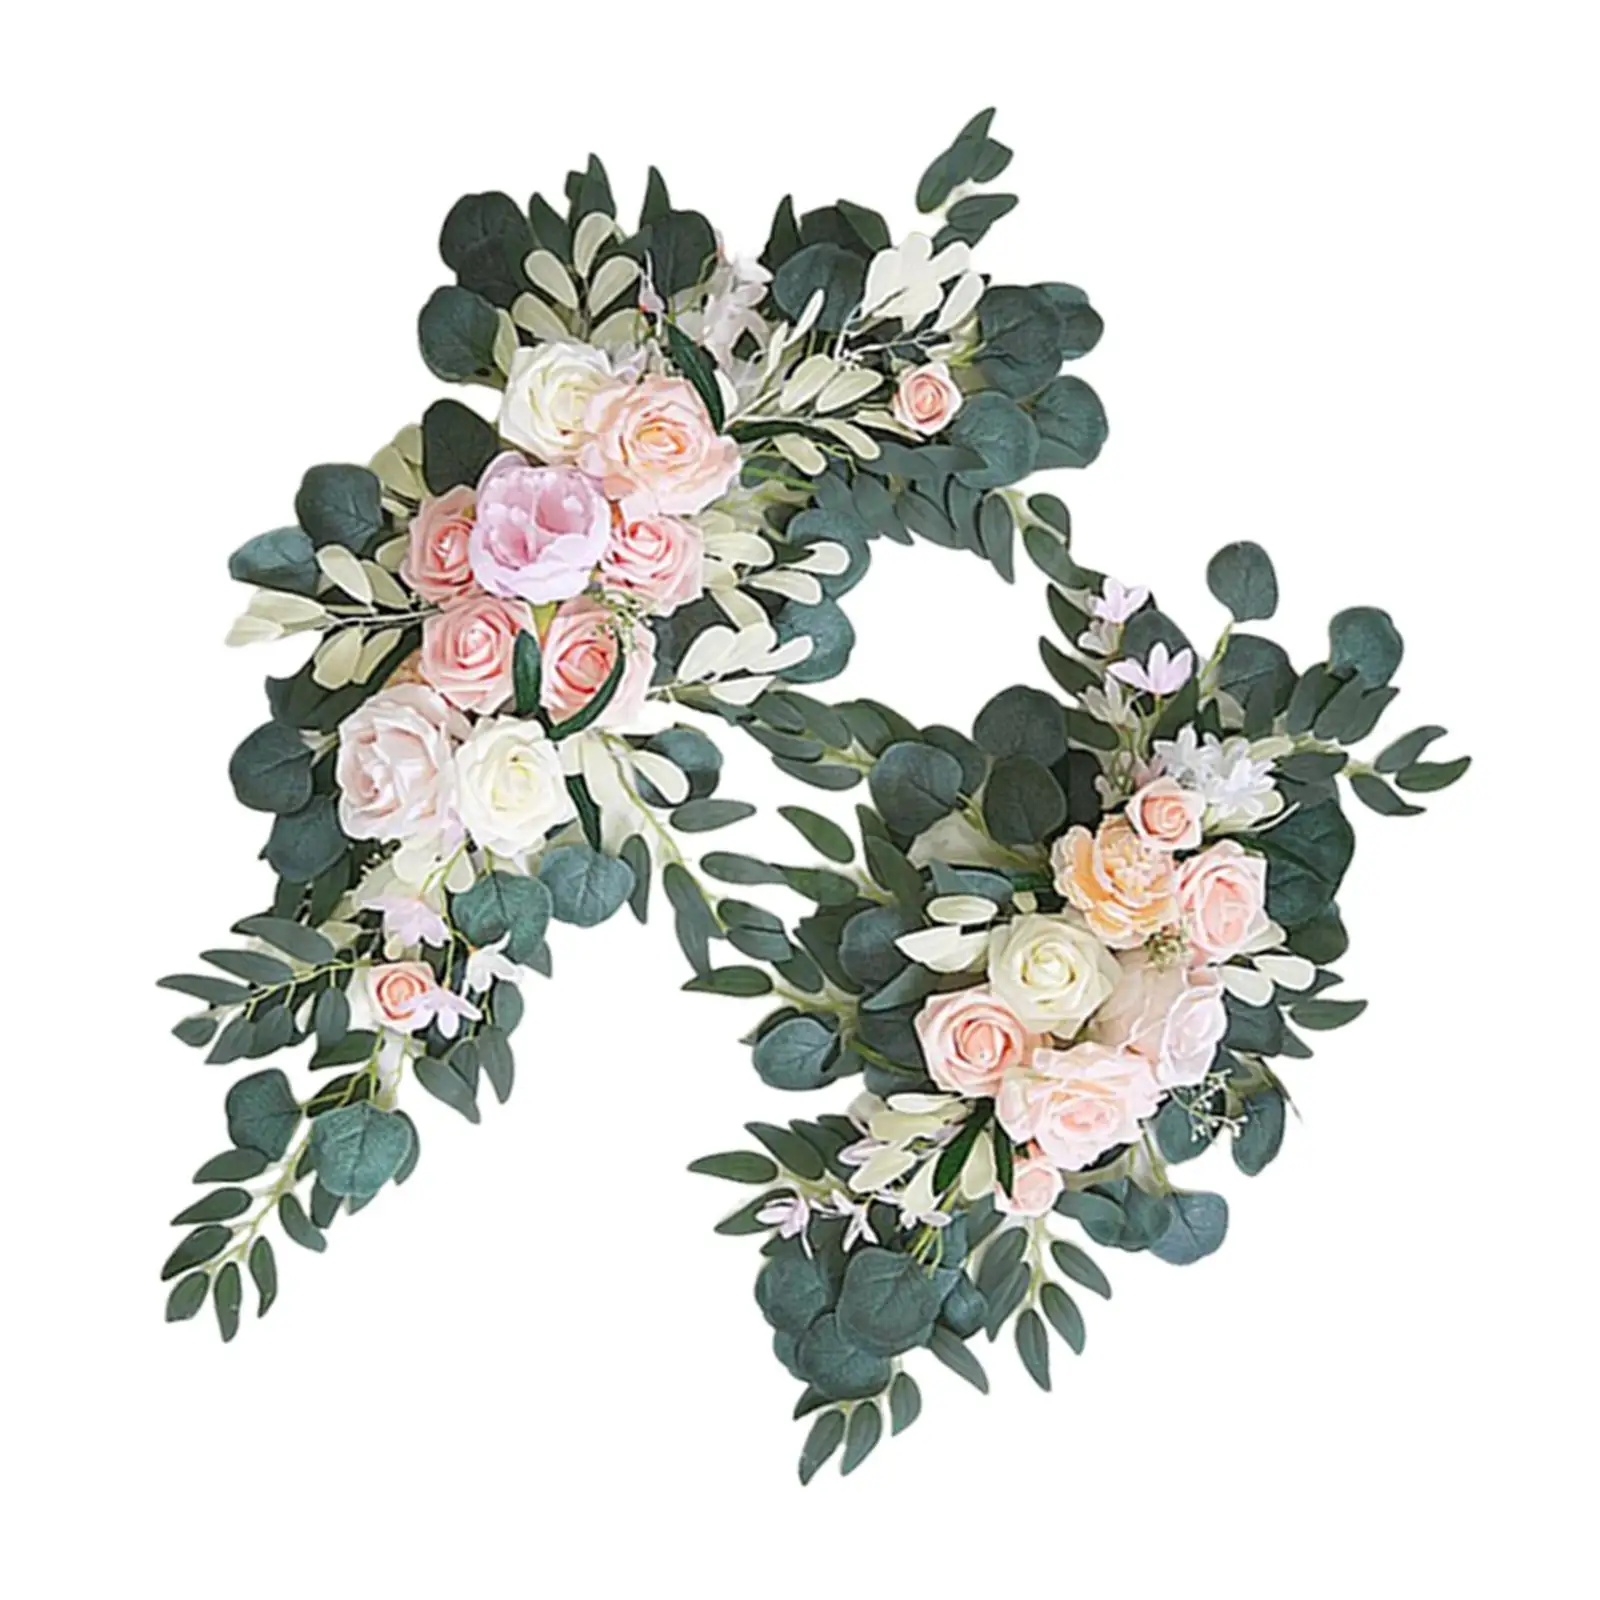 Lifelike Artificial Wedding Arch Flowers Floral Arrangement Wedding Flowers Garlands for Ceremony Party Wall Decoration